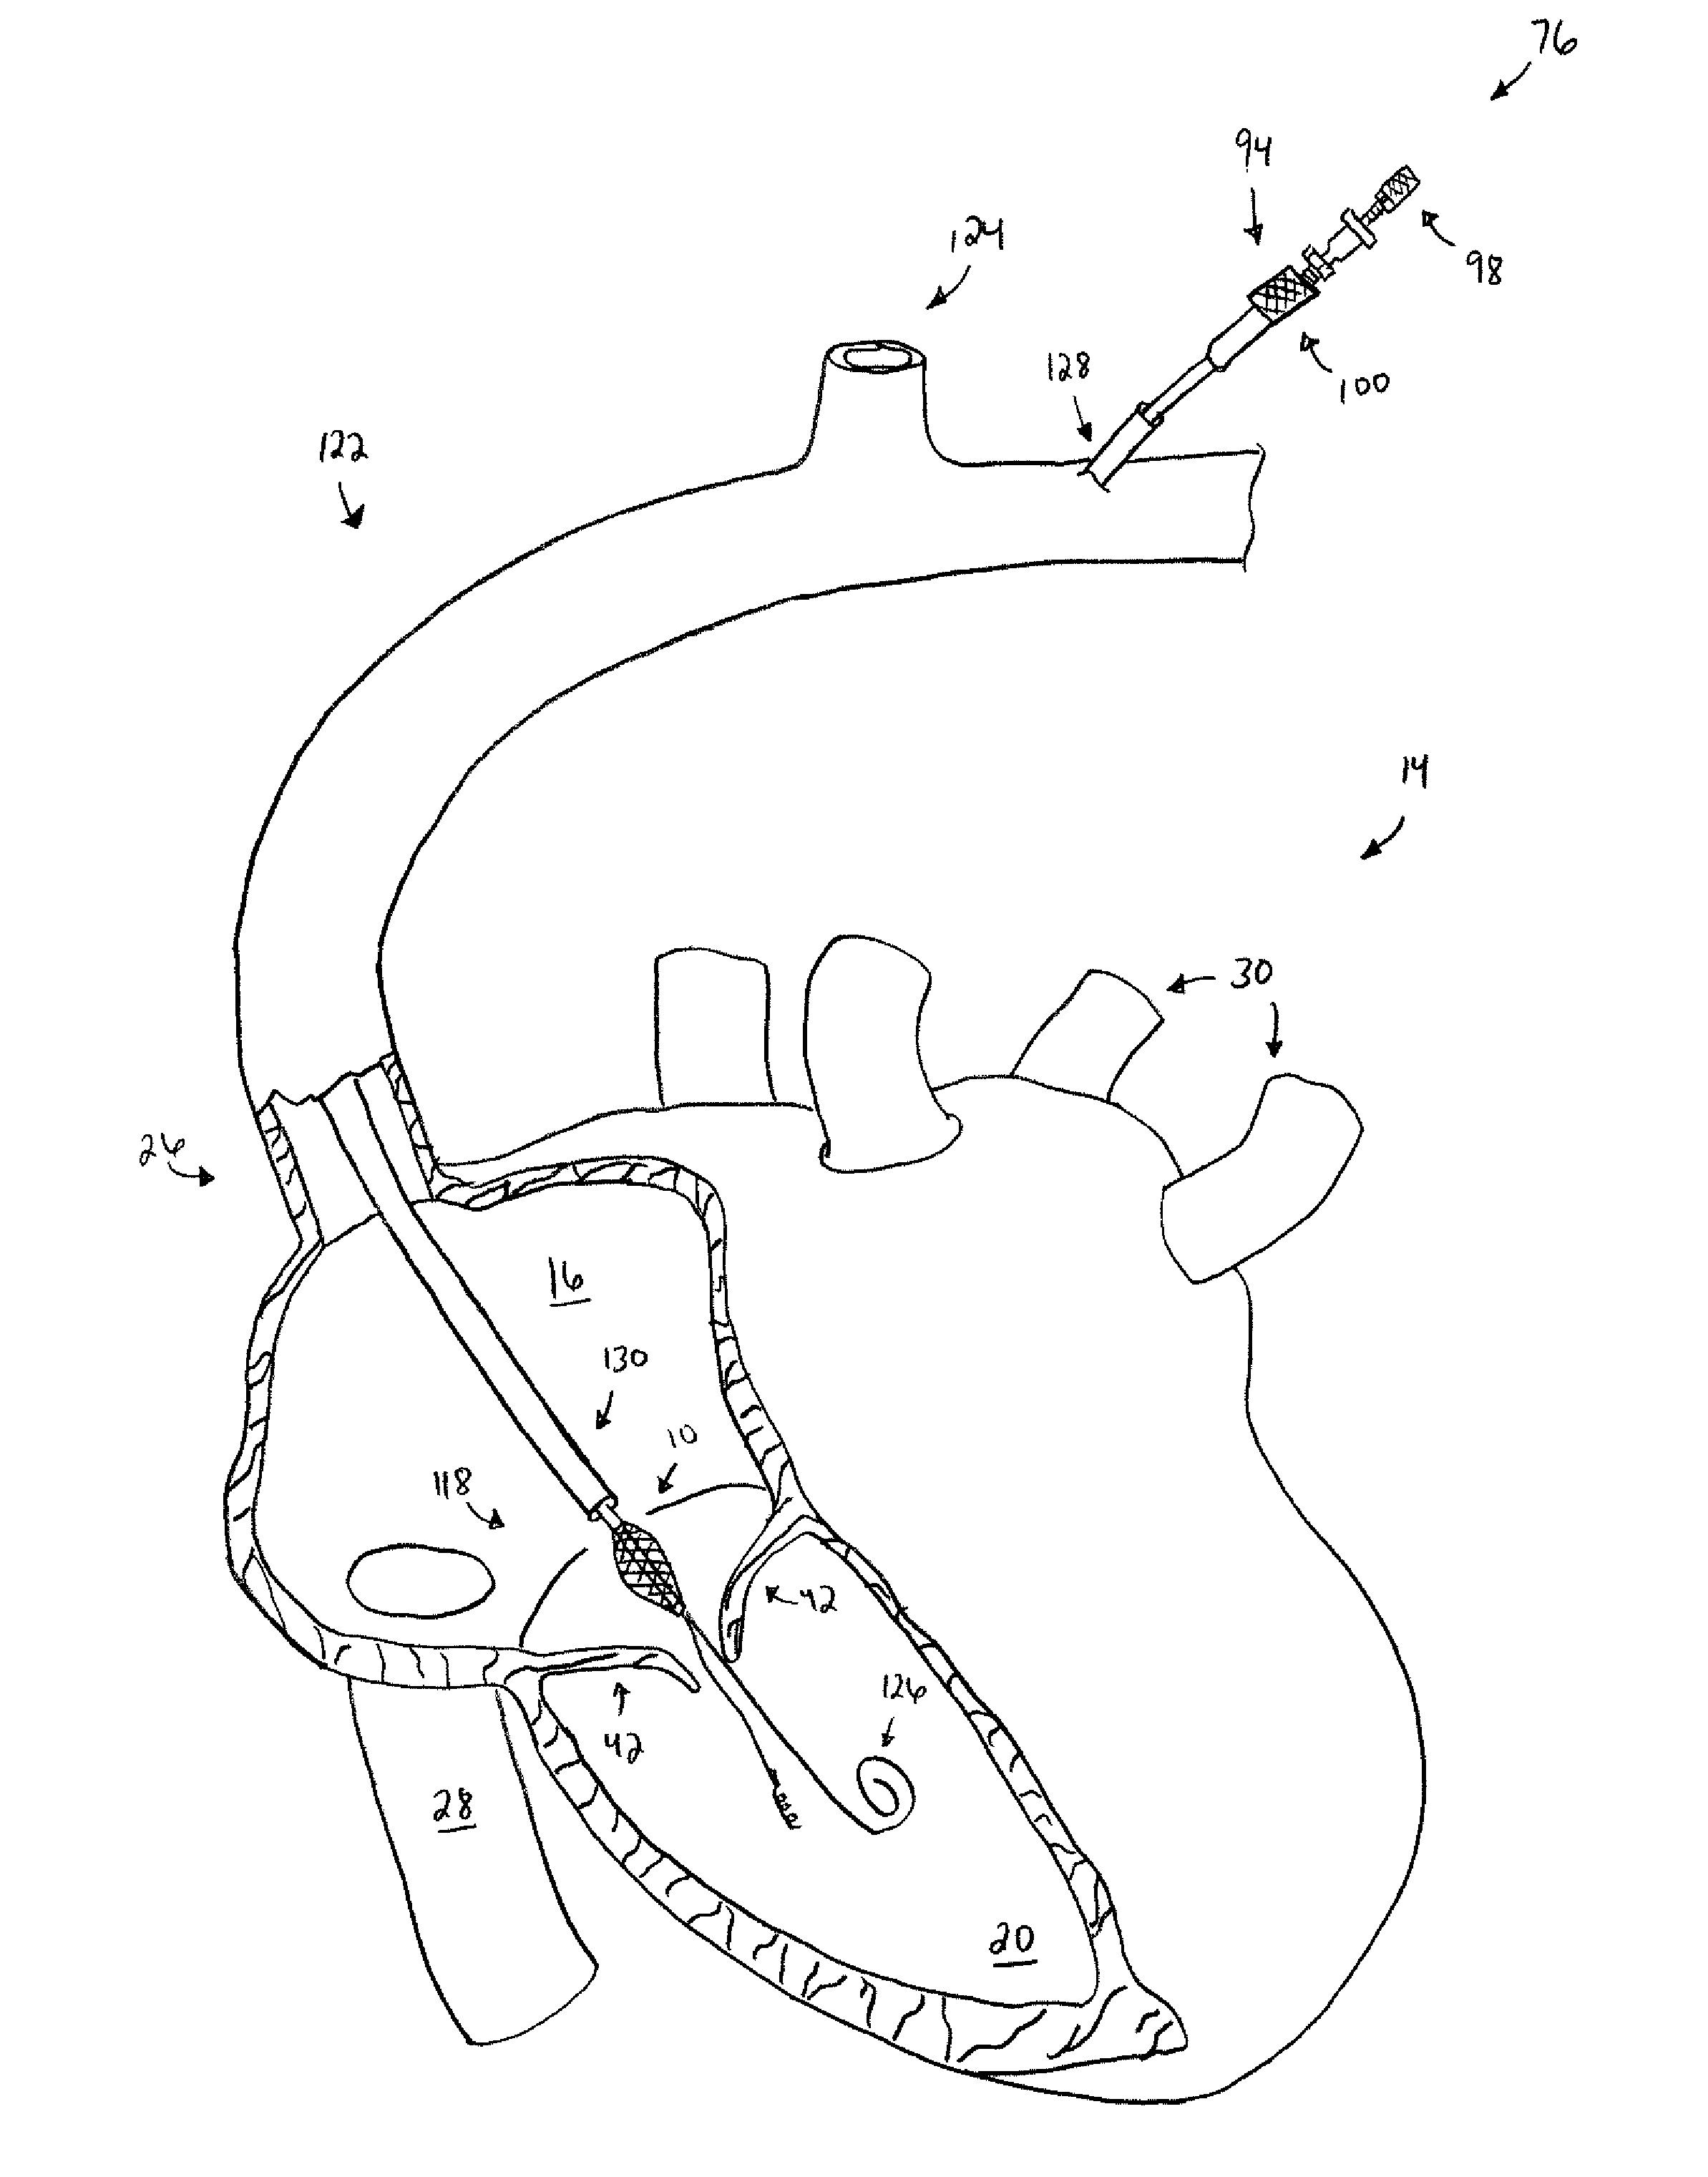 Apparatus, system, and method for treating a regurgitant heart valve